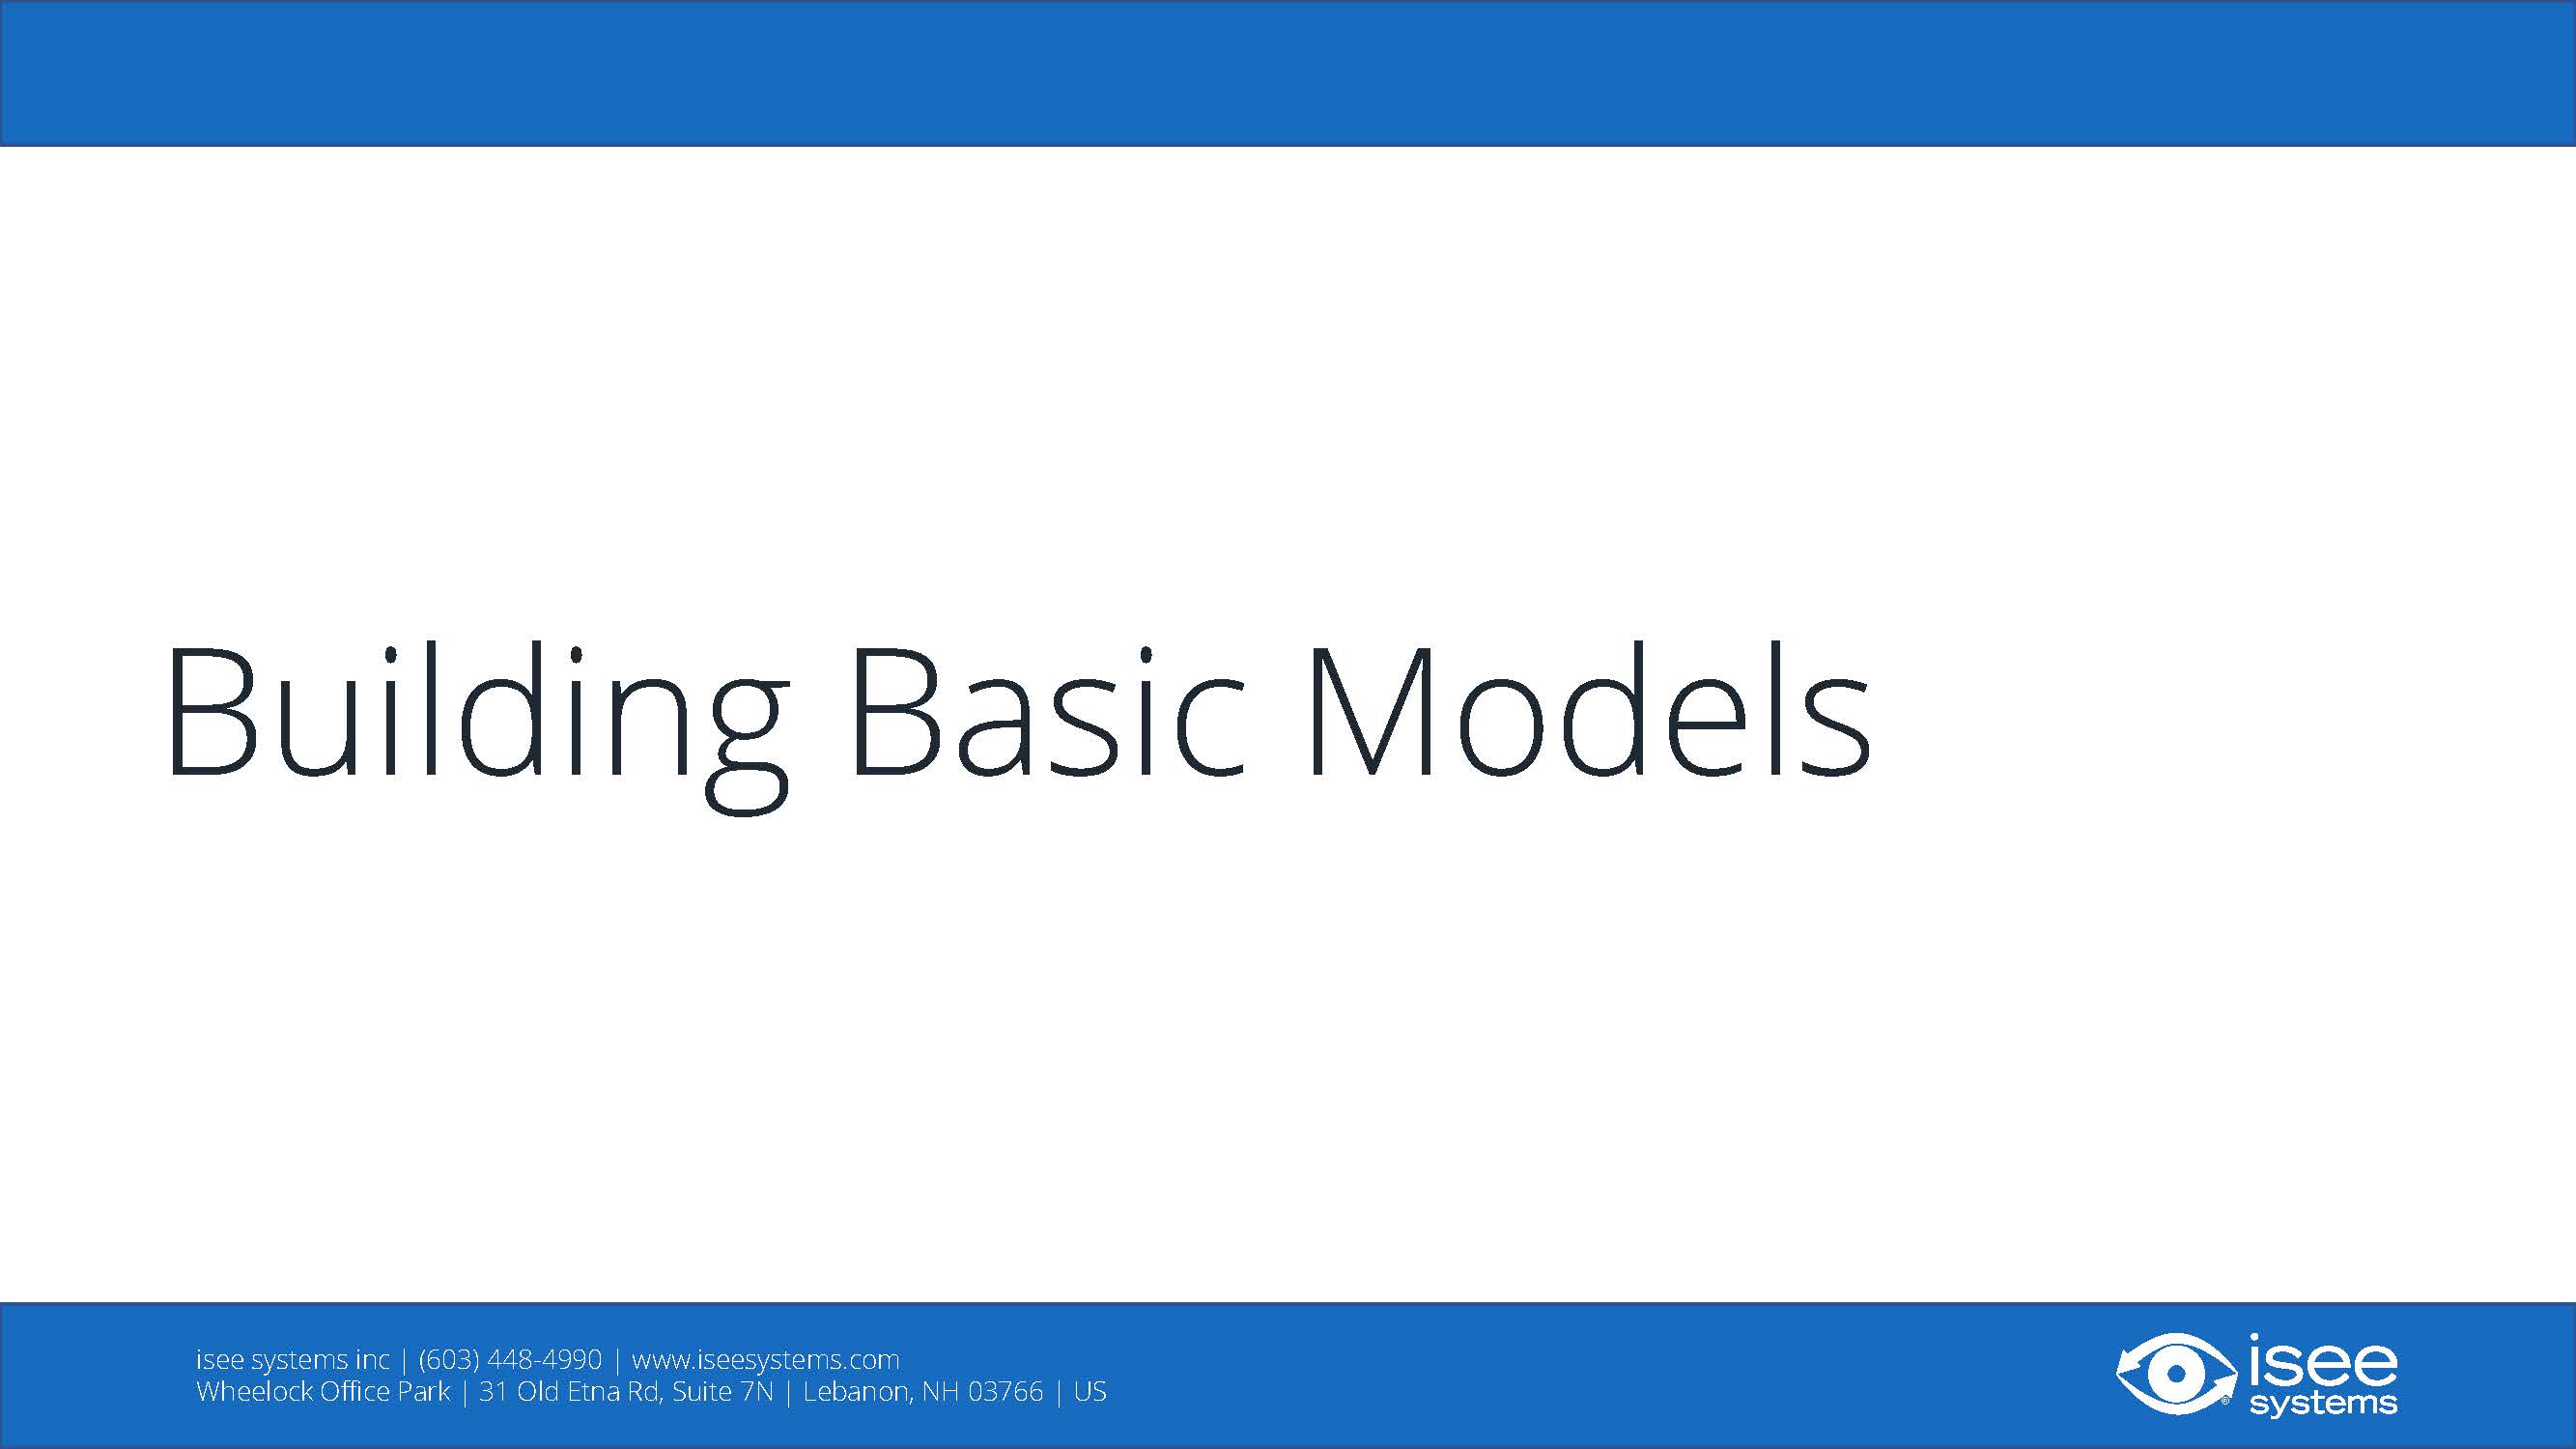 Watch Introduction to Modeling